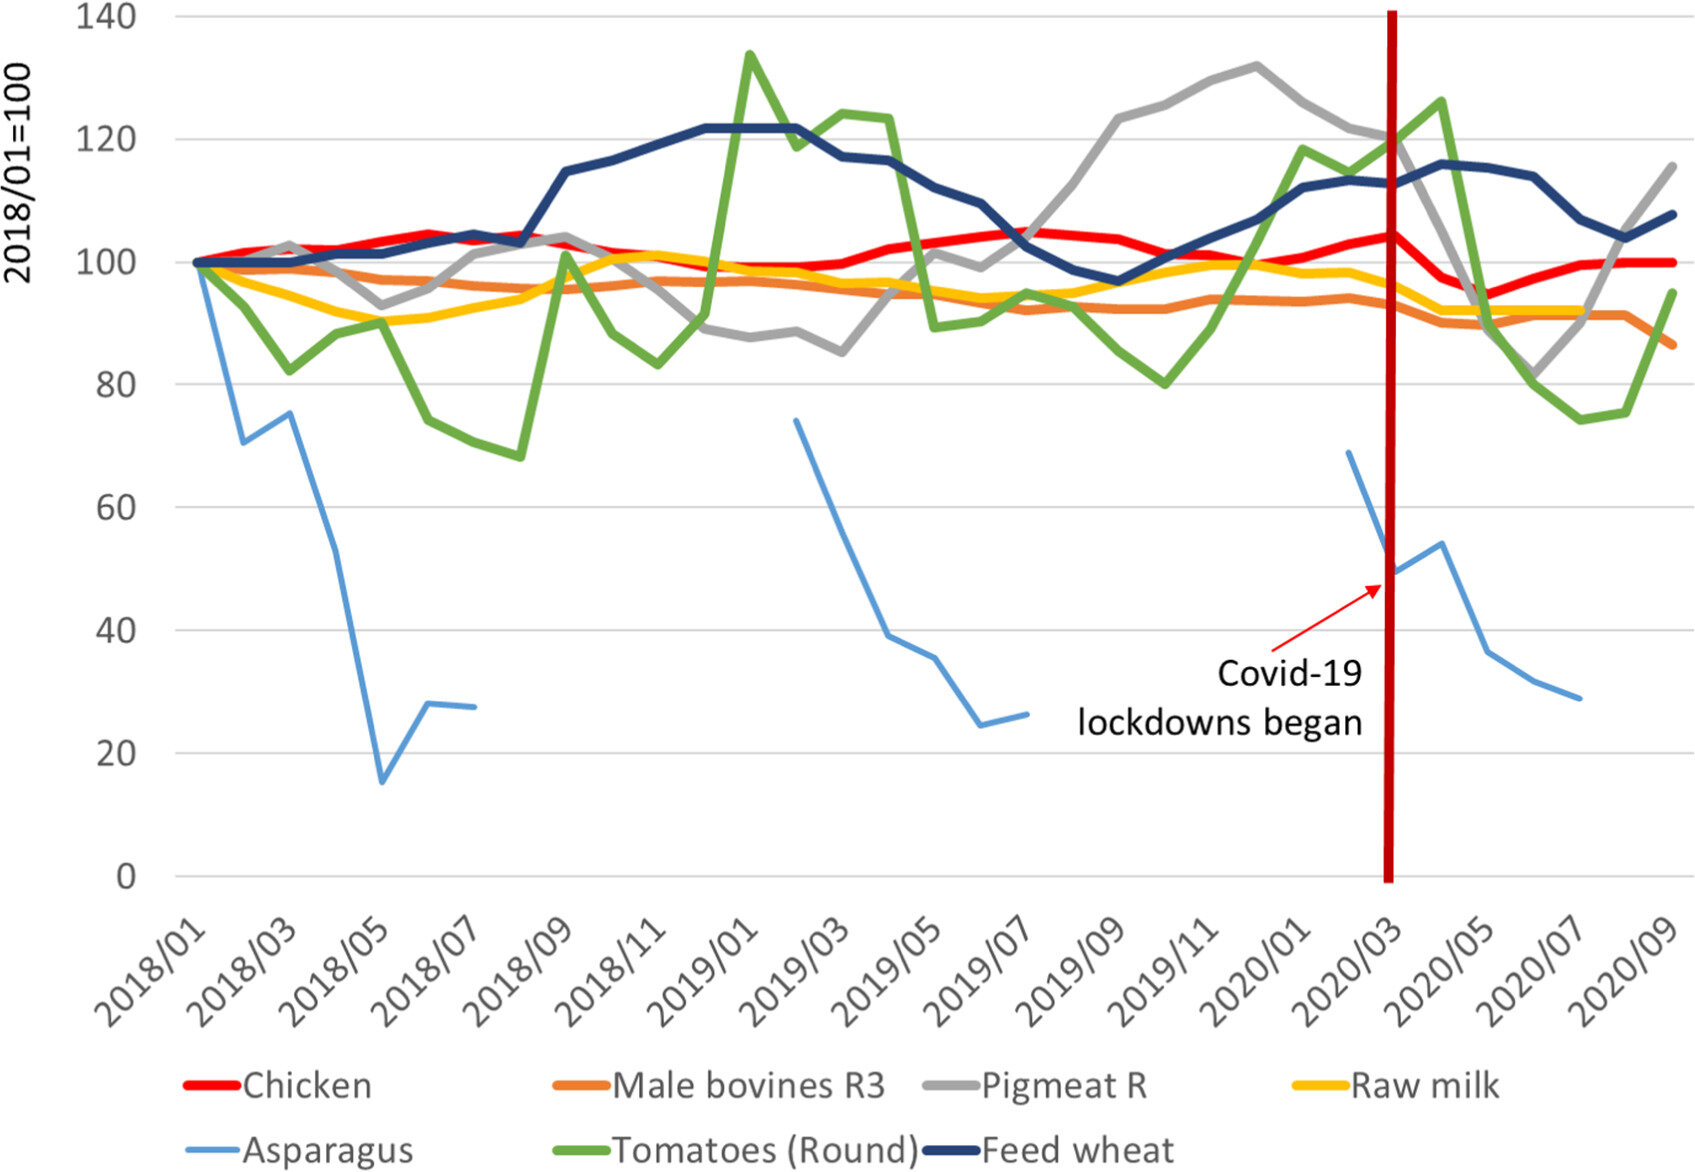 Price trends for selected commodities in the EU between January 2018 – September 2020; Source: Data from the agri-food data portal, and chart from Alan Matthews